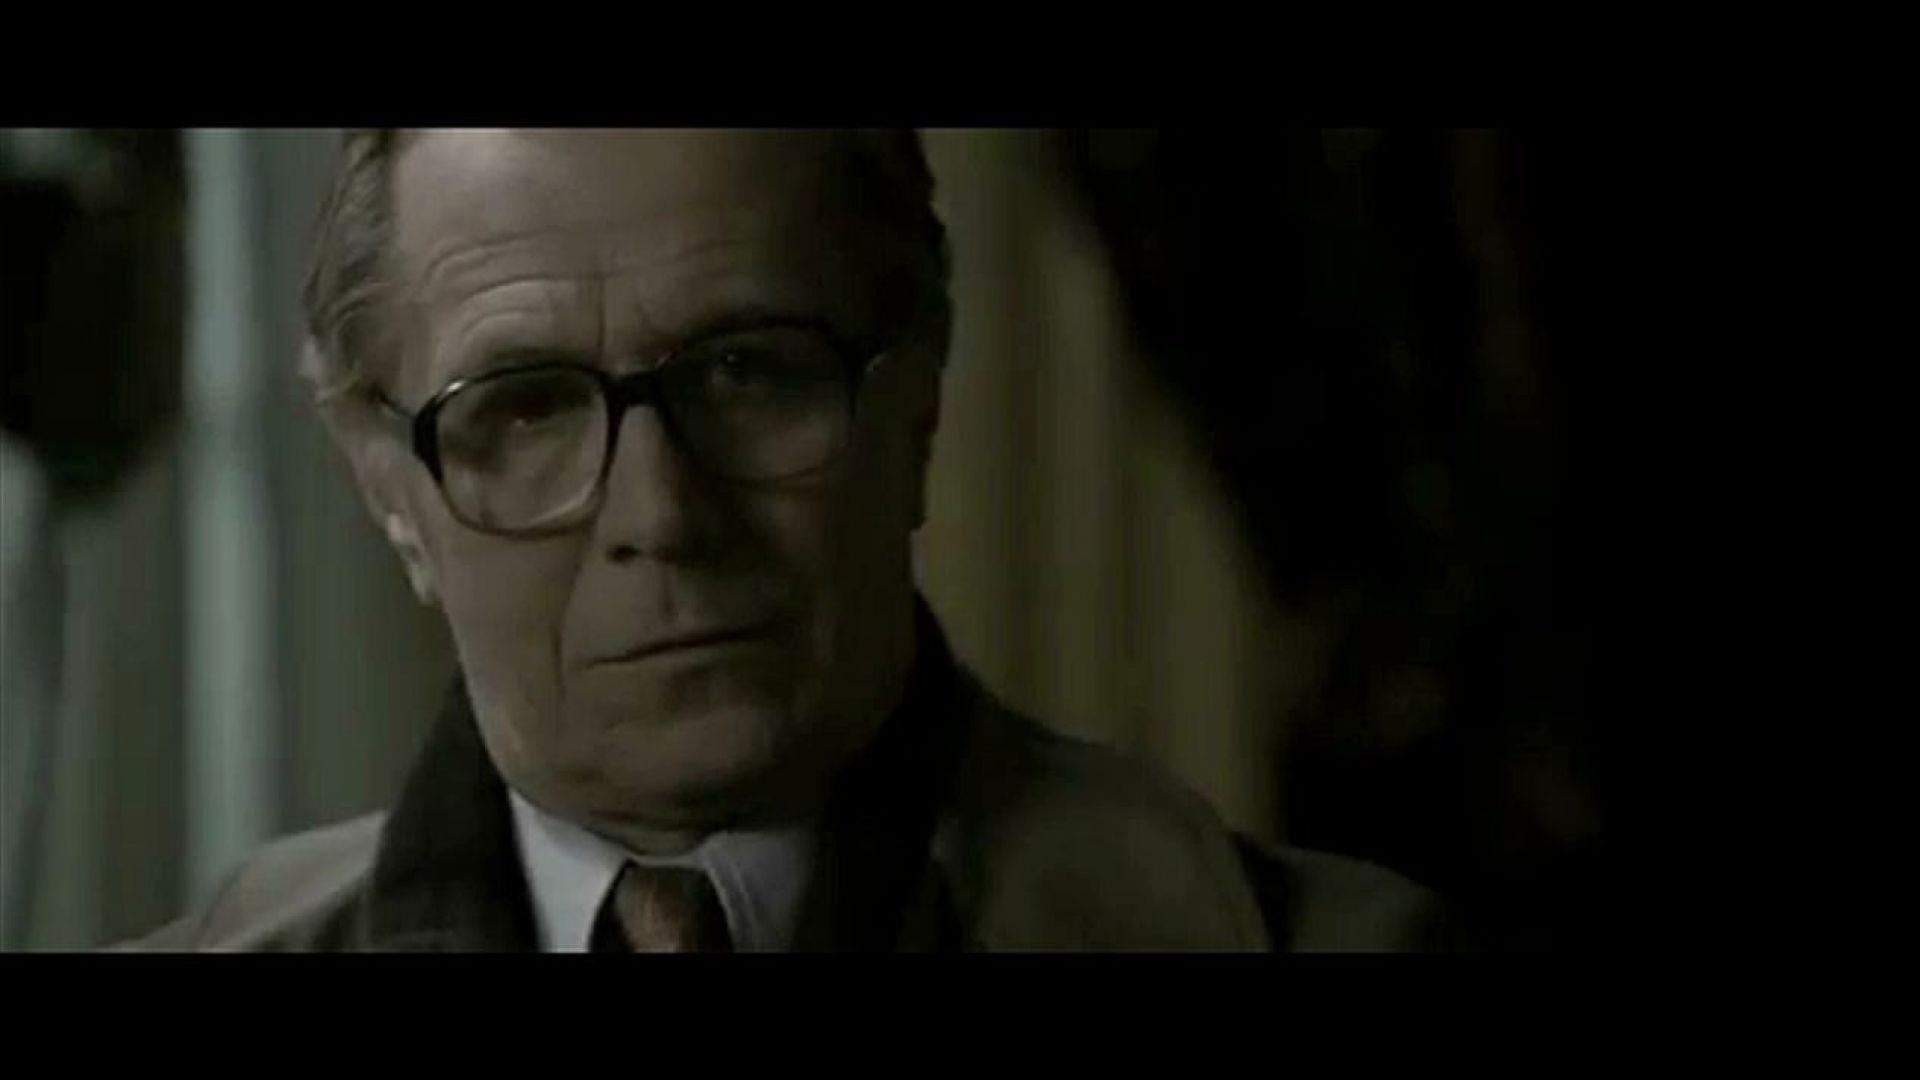 All I want from you is one codename. Tinker Tailor Soldier Spy